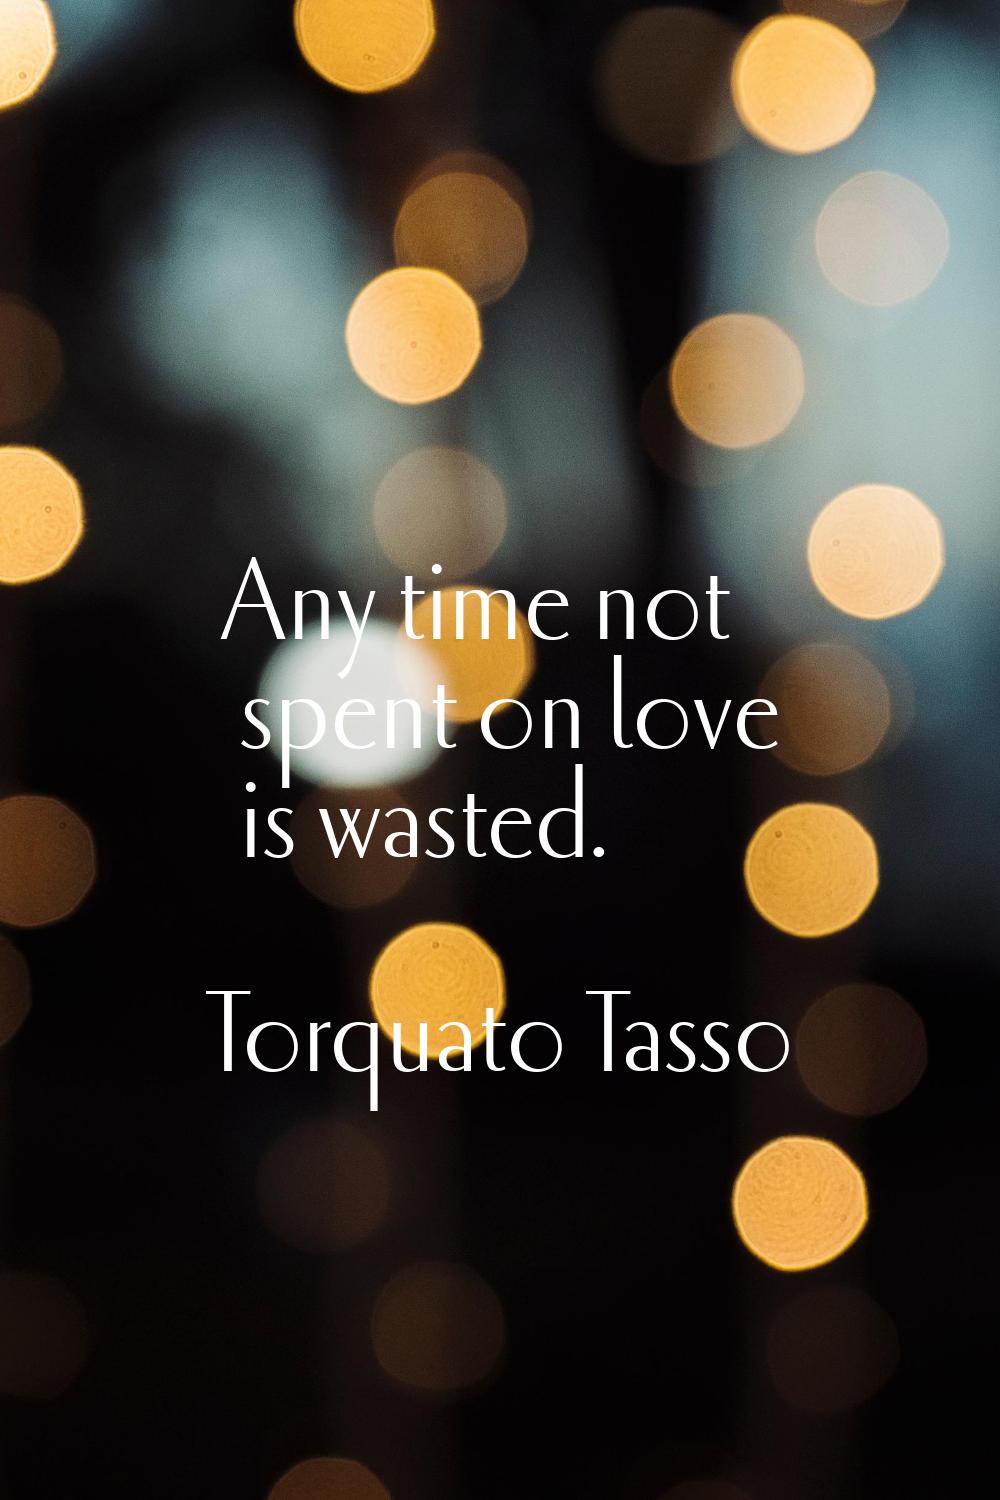 Any time not spent on love is wasted.